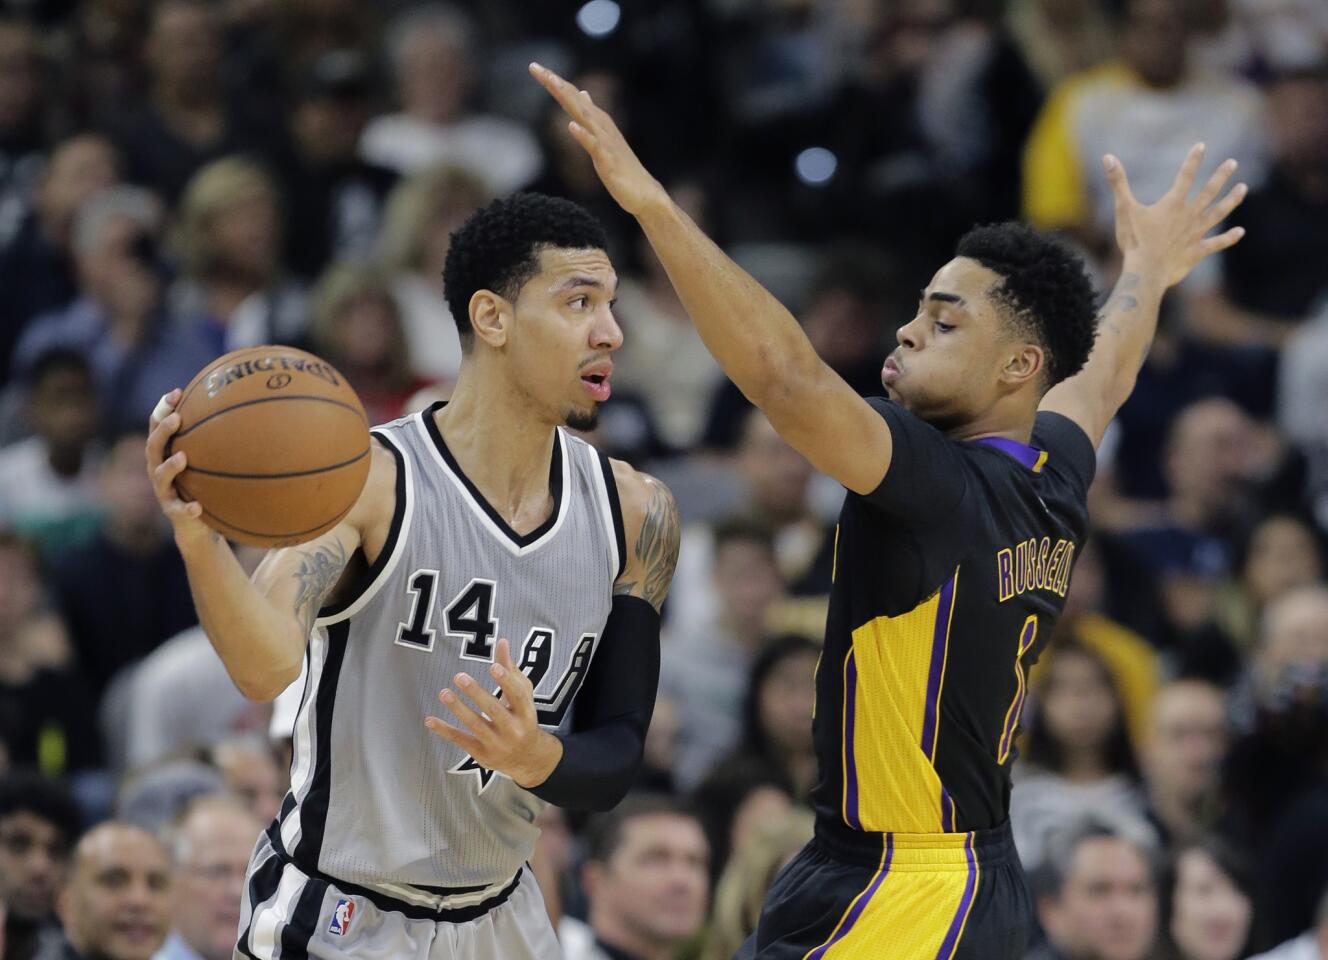 Confidence is showing in D'Angelo Russell's play